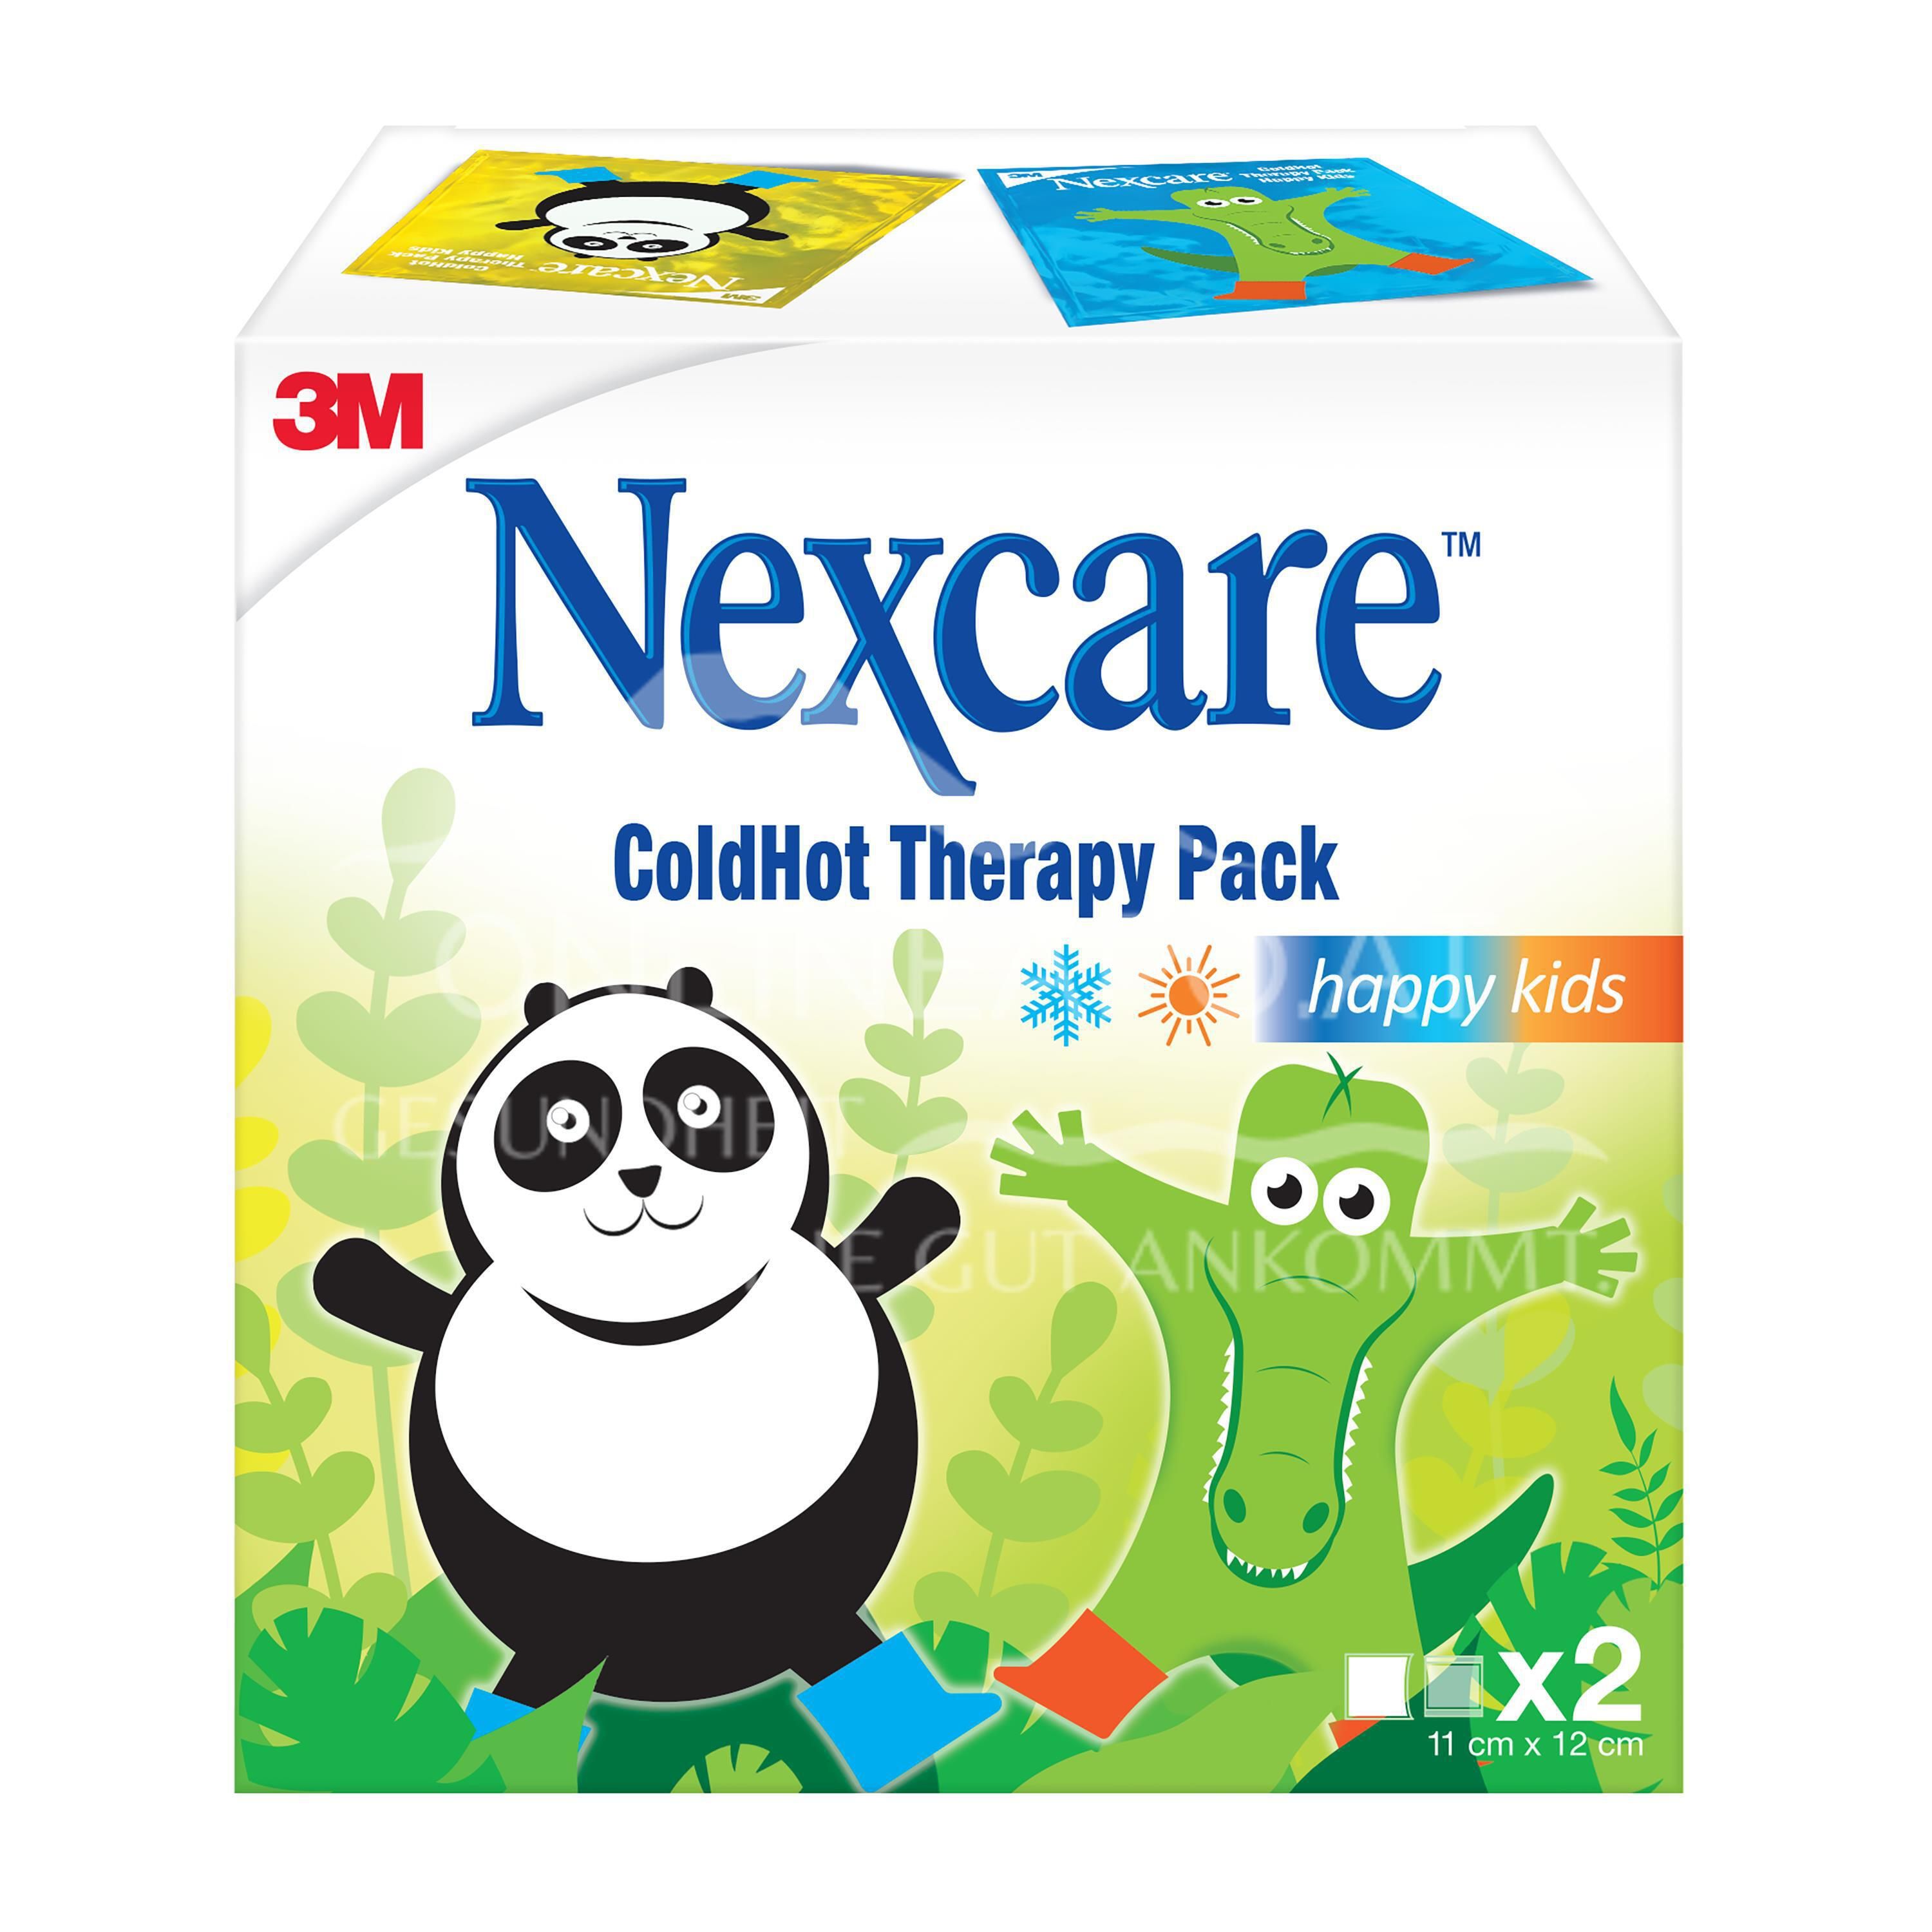 3M Nexcare™ ColdHot Therapy Pack Happy Kids, 12 x 11 cm